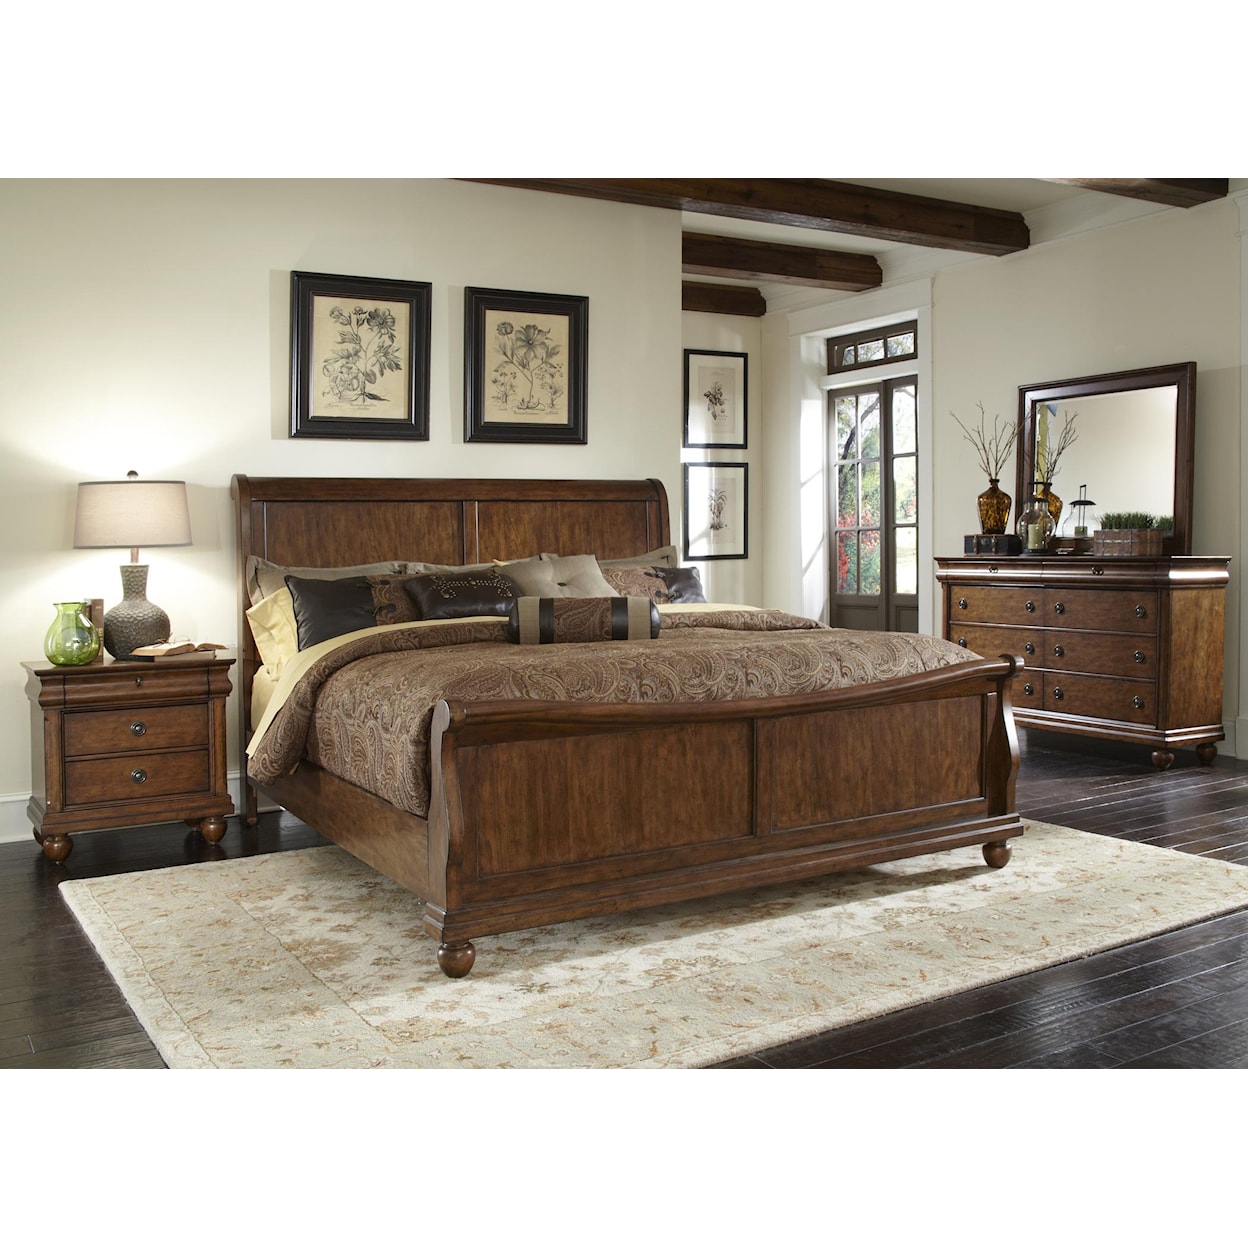 Liberty Furniture Rustic Traditions Dresser and Mirror